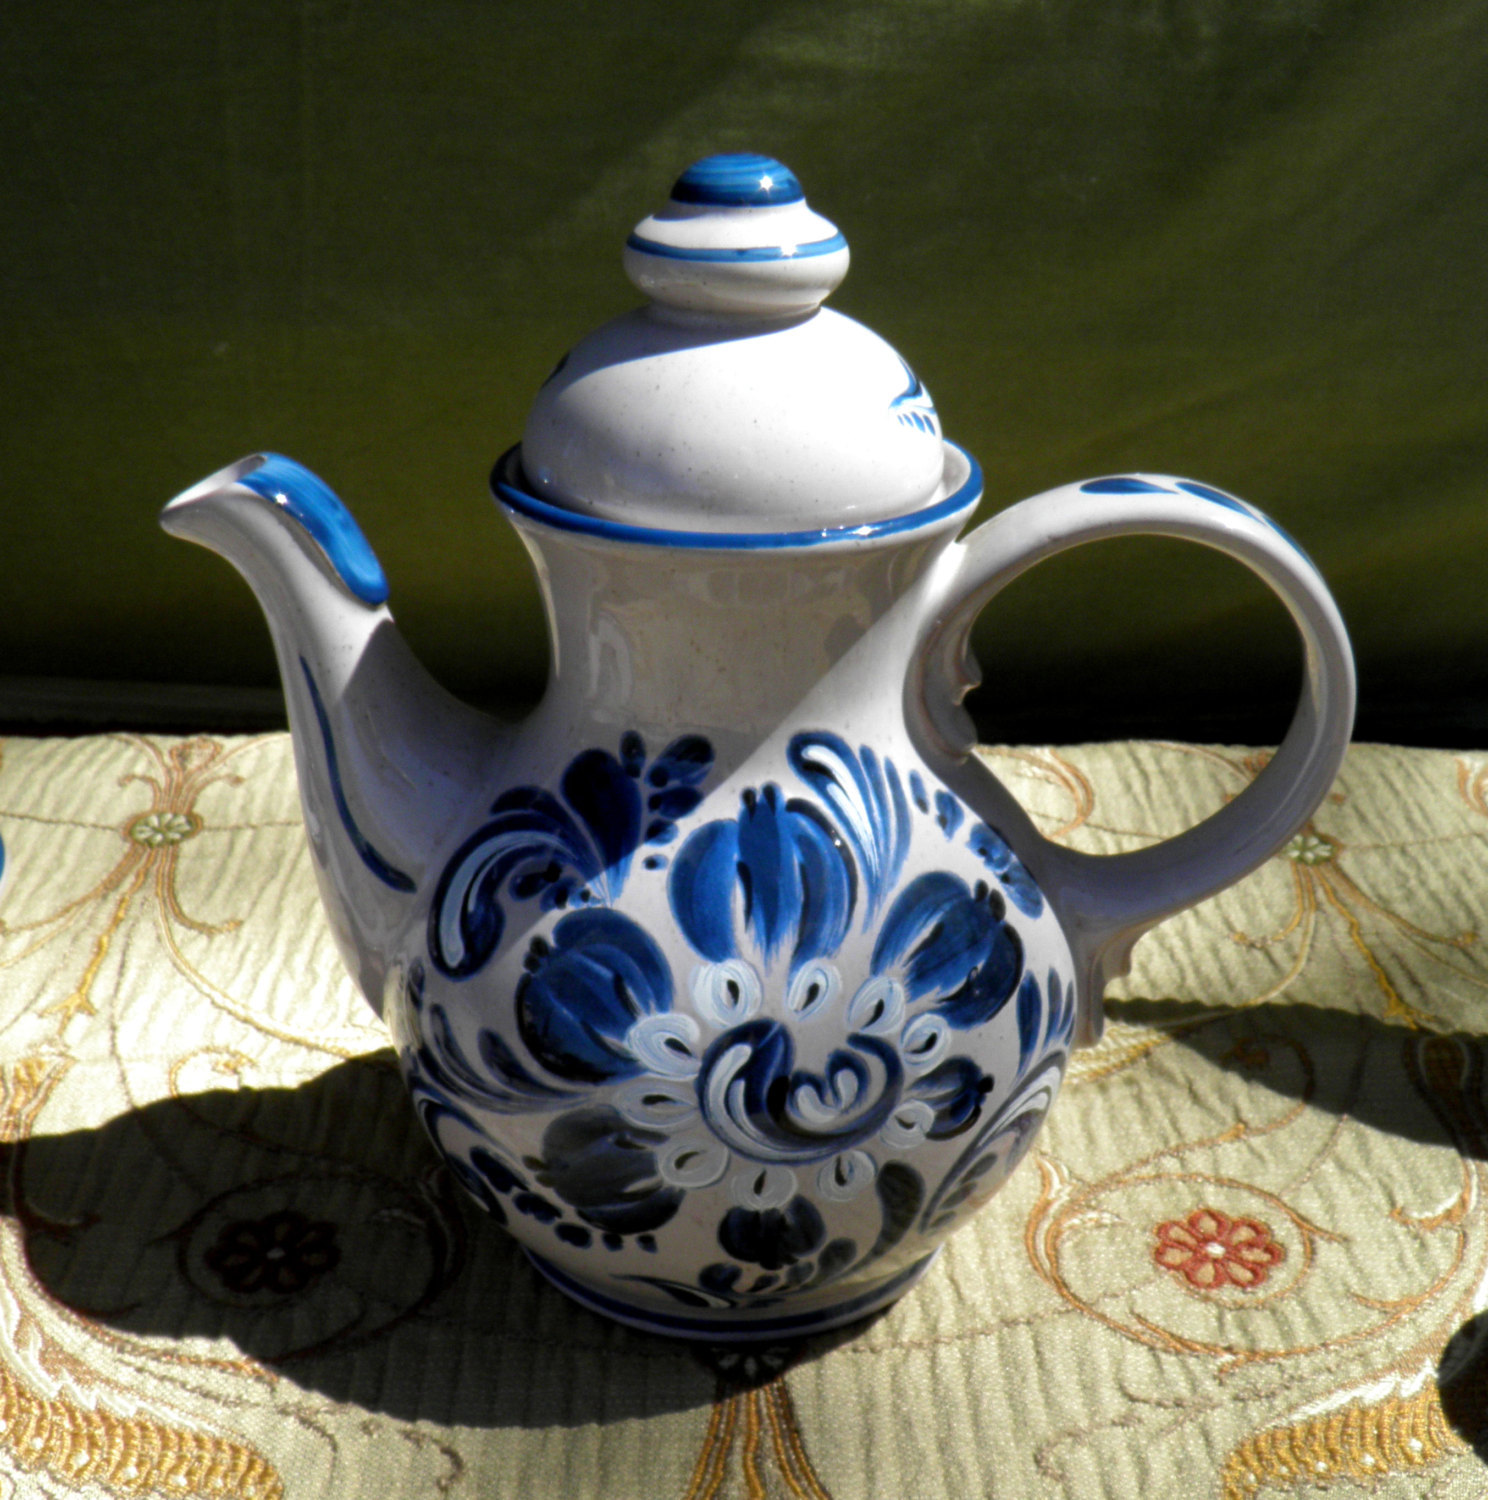 Bavarian Style Red Ware Coffee Pot - Tea Pot - with Floral Motif - Ceramic Redwa - $55.00